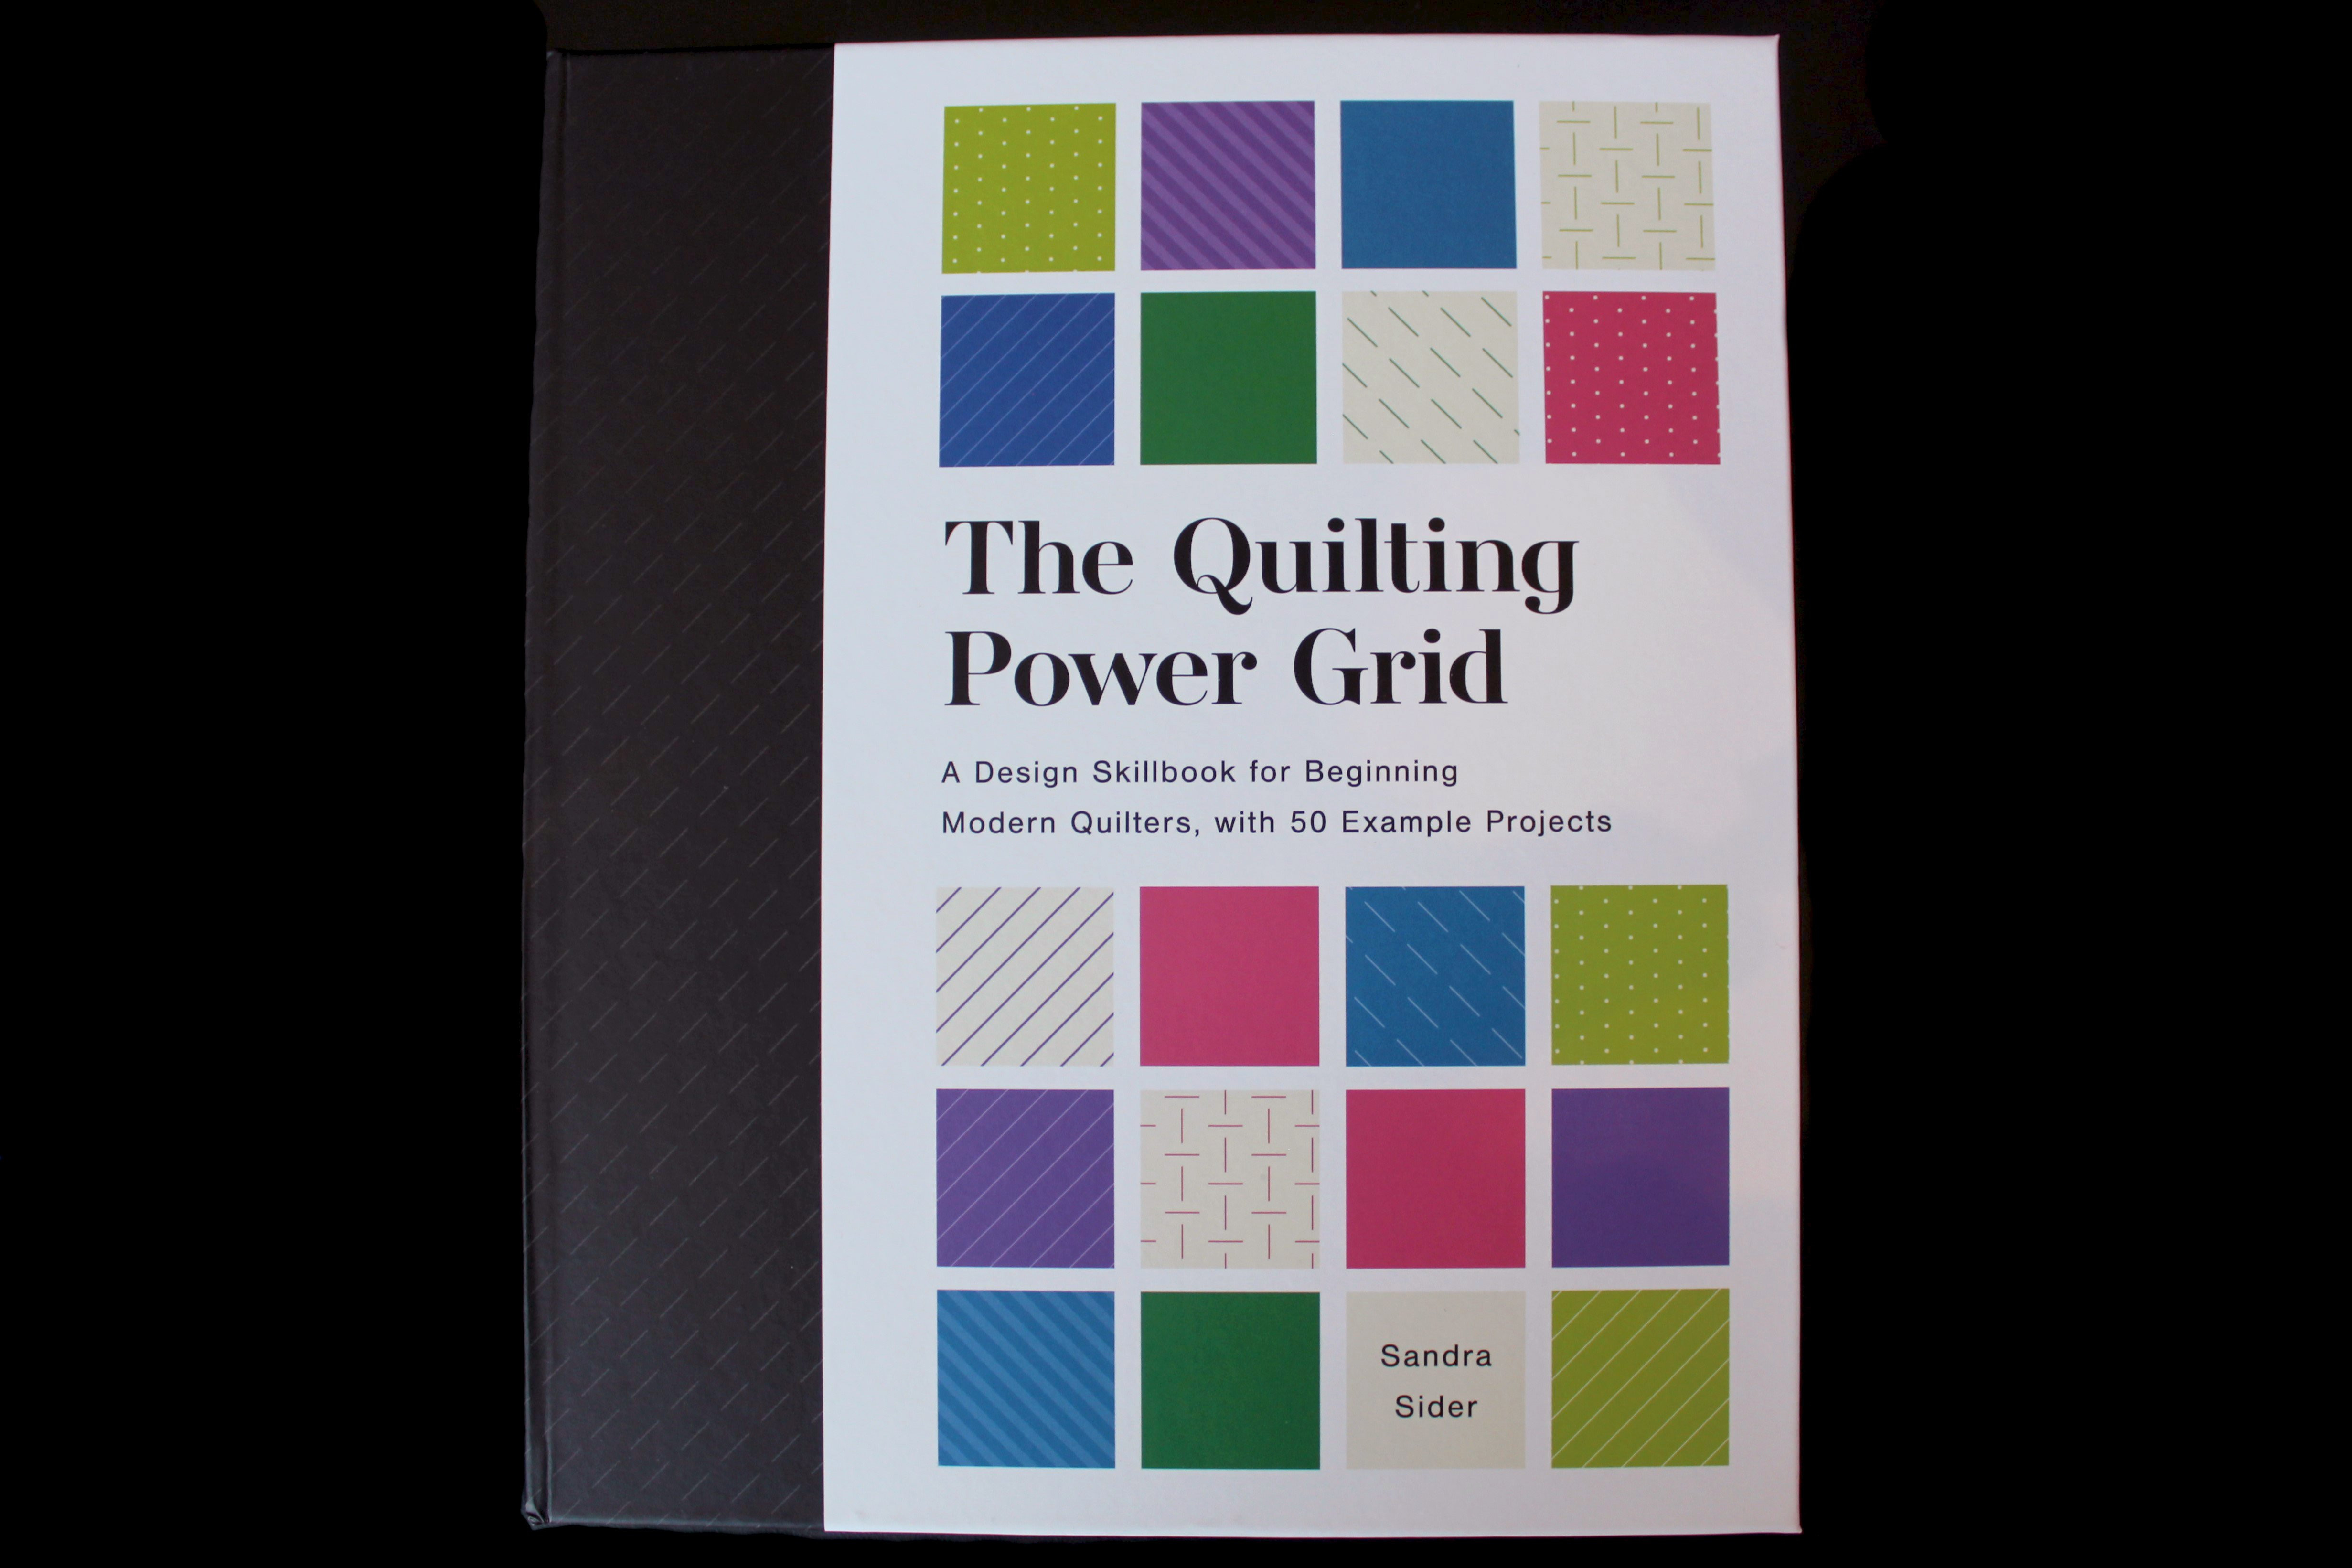 The Quilting Power Grid